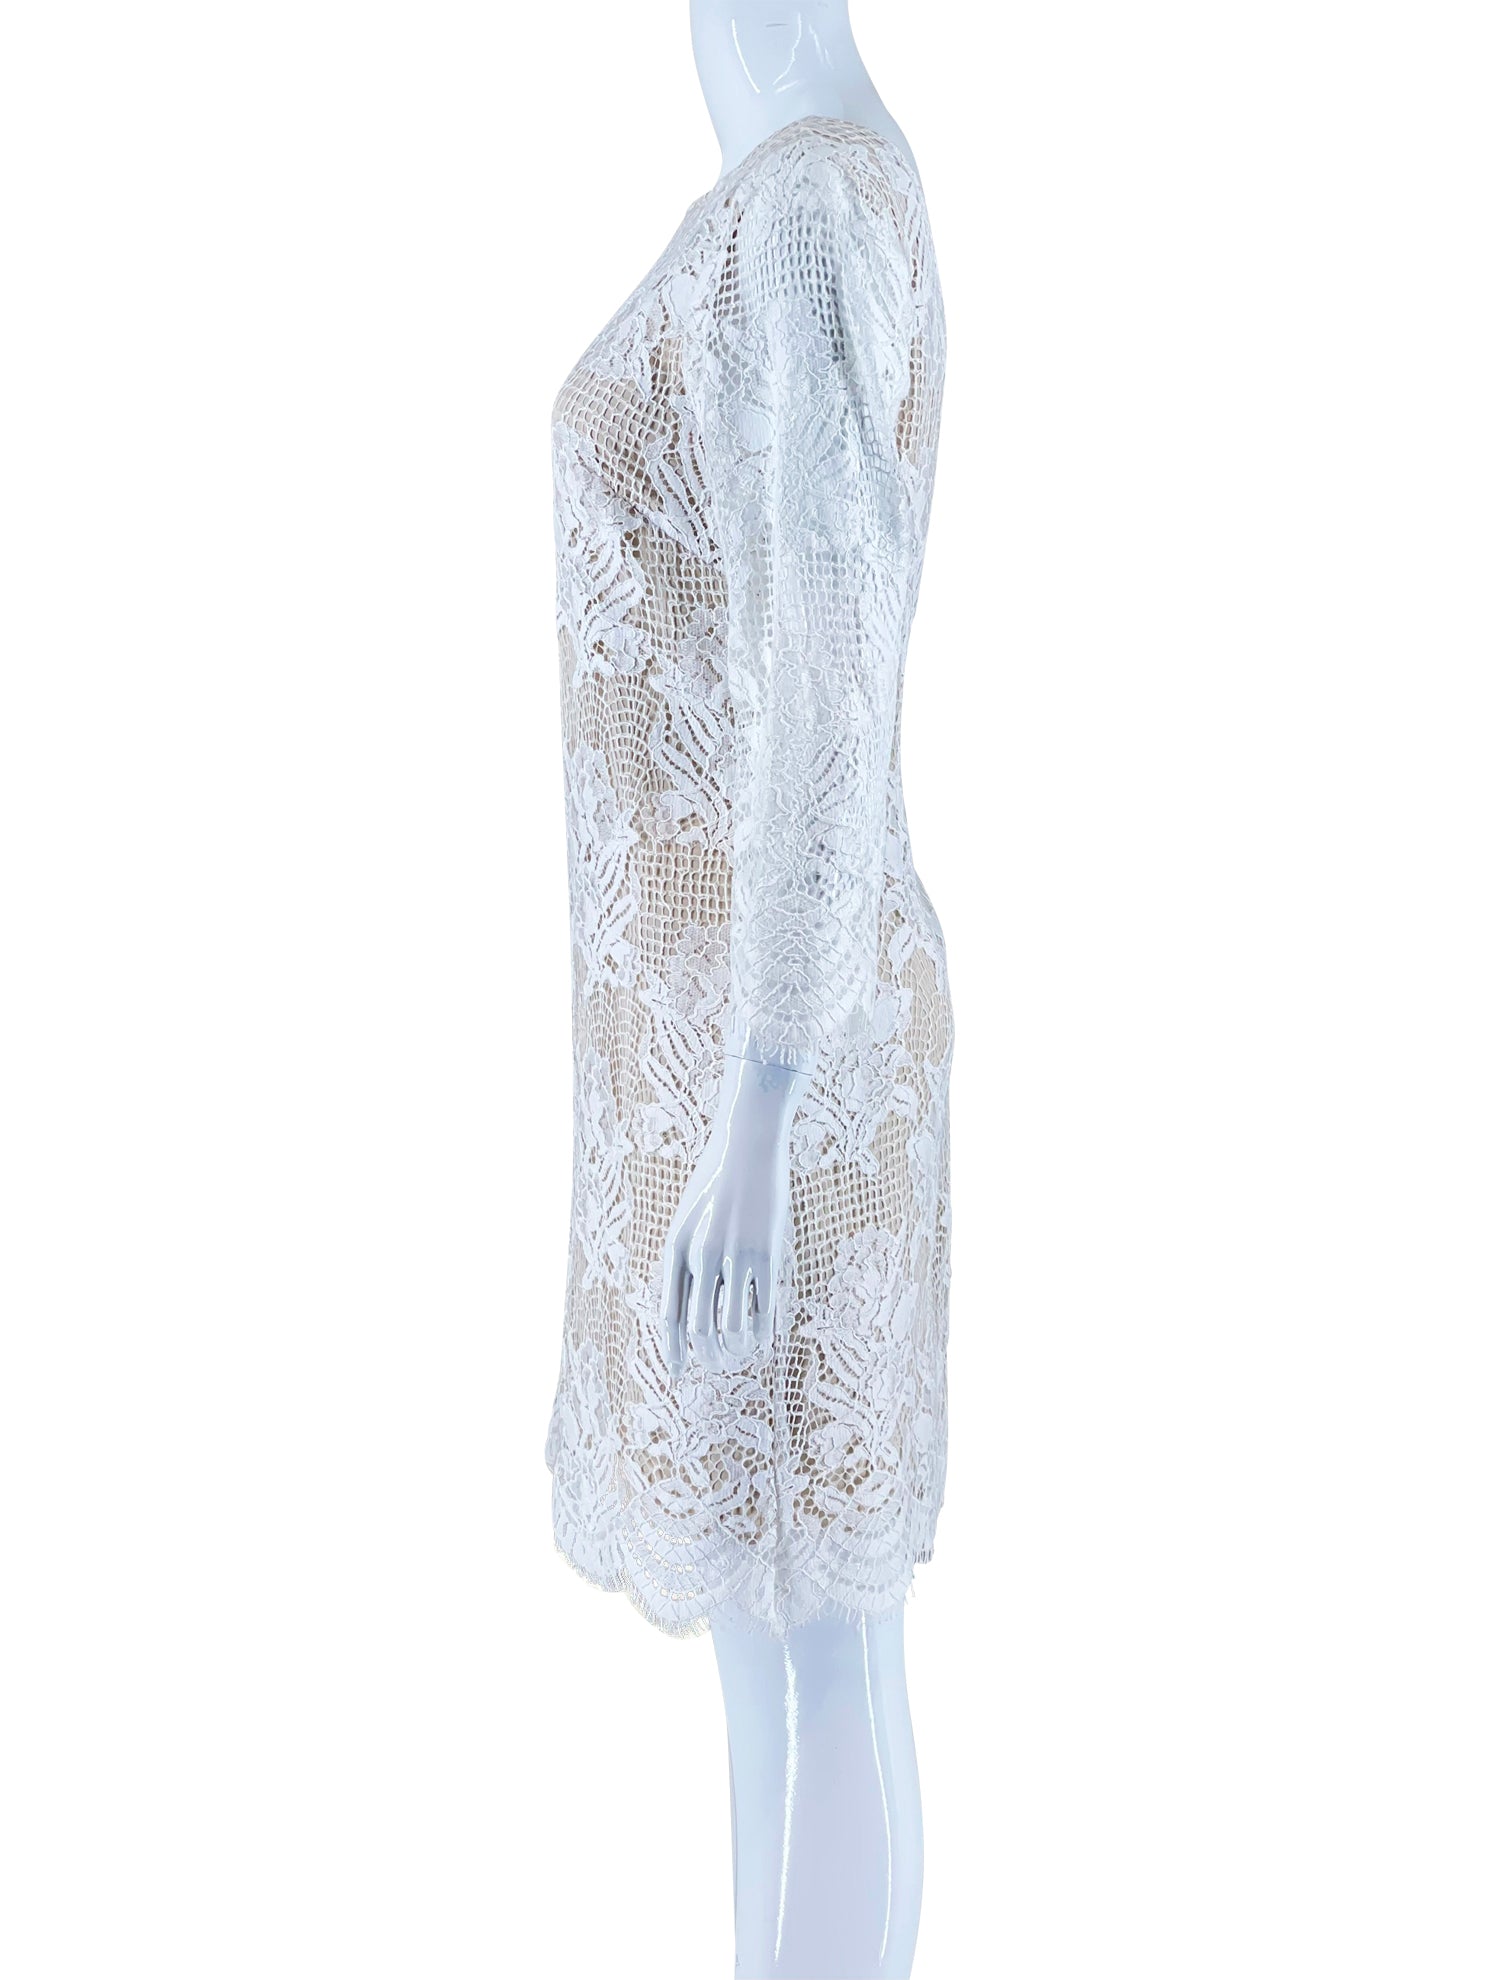 Vince Camuto White Lace Dress